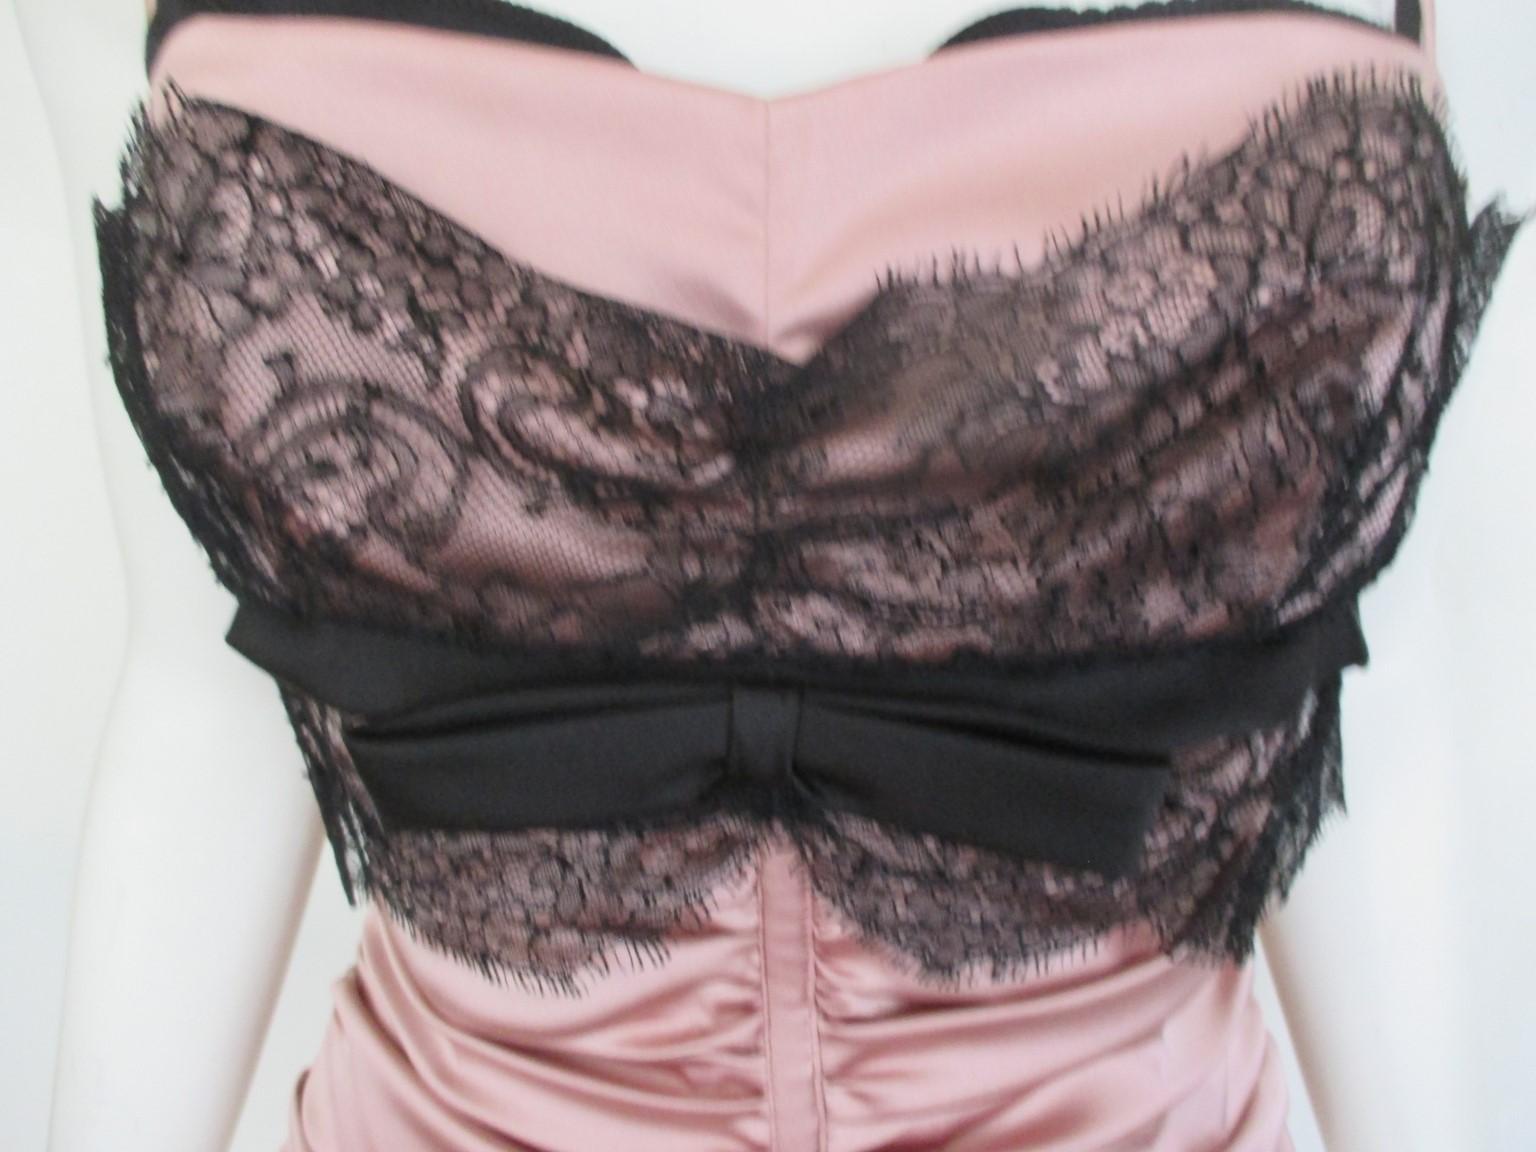 Dolce & Gabbana Bustier, corset

We offer more exclusive vintage items, view our frontstore

Details:
This is a beautiful Dolce & Gabbana silk ruched Mauve corset top with black lace trimming along chest as well as silk ribbon below breast around